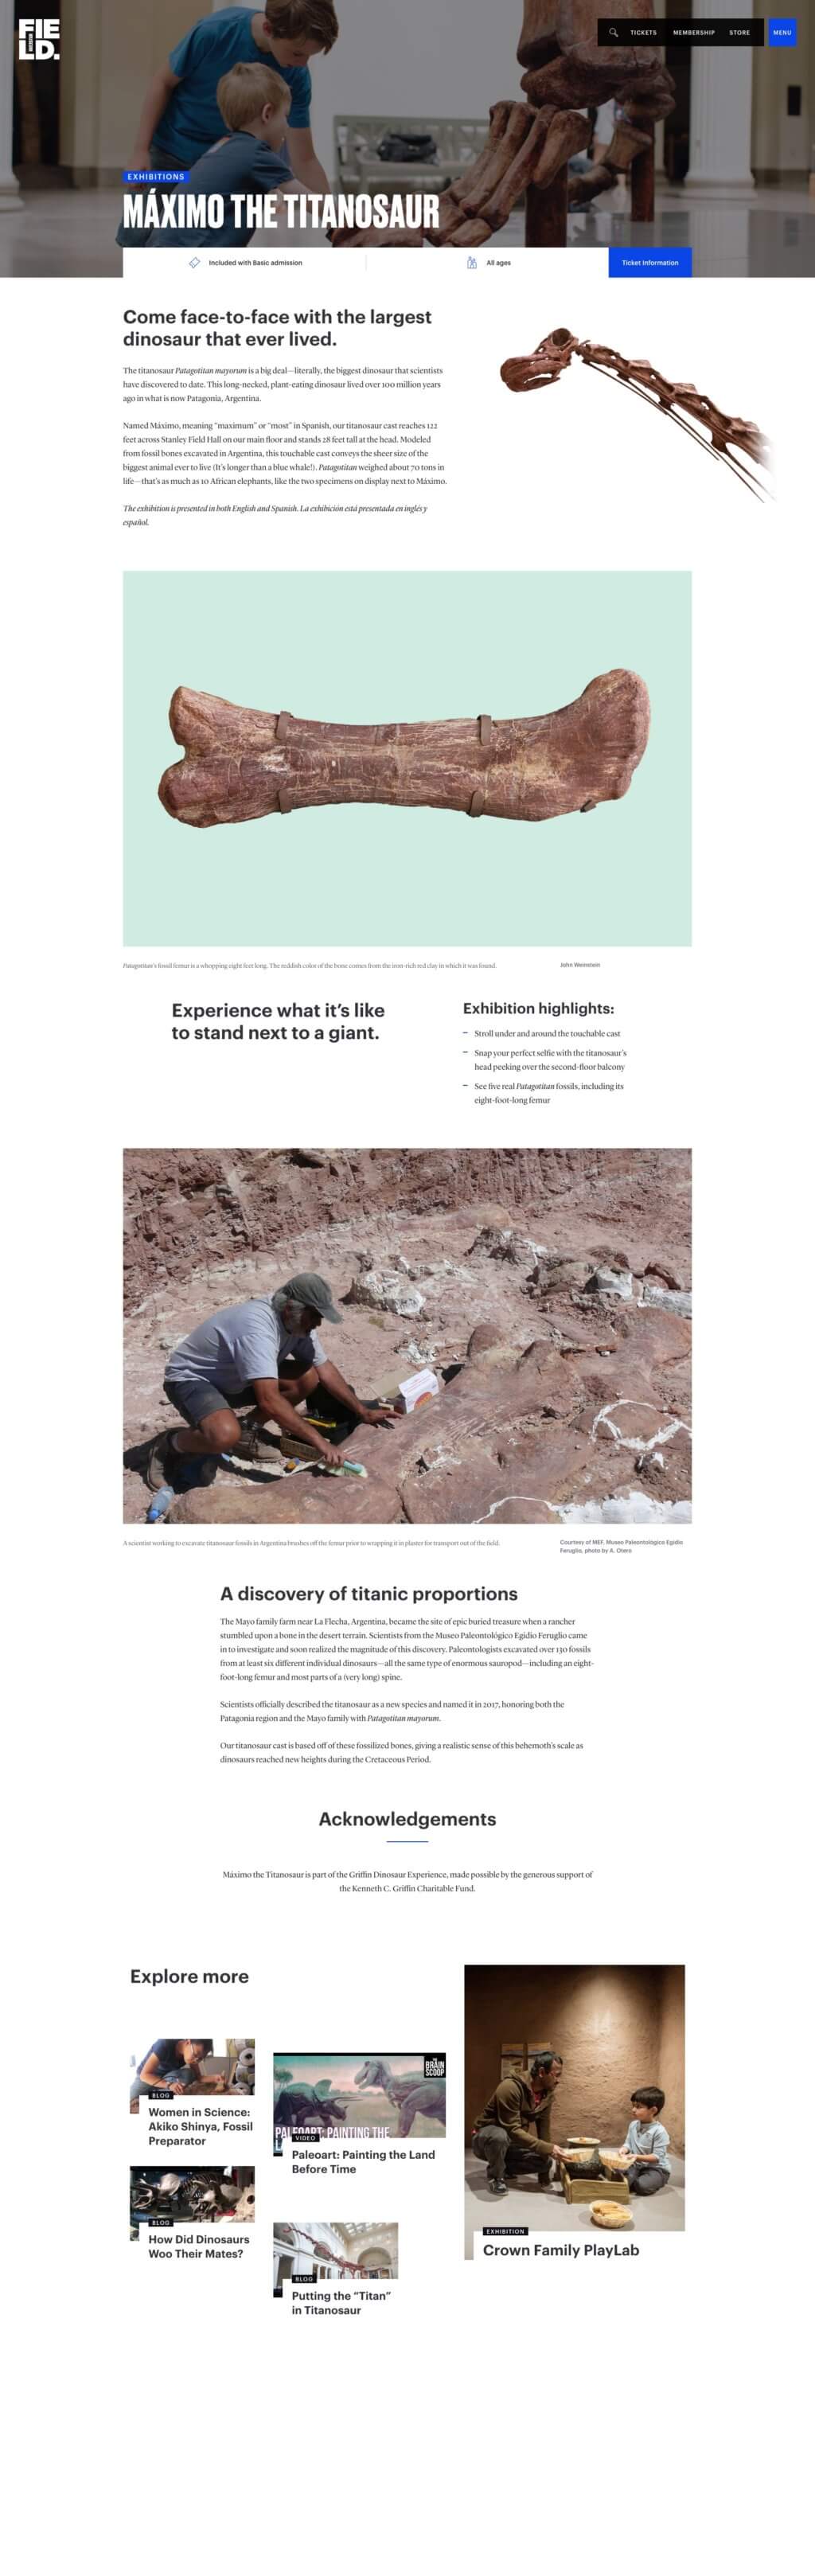 A screenshot of a Field Museum webpage featuring a vertical arrangement of images, including a close-up of a bone and an archeologist in a dirt field as well as blocks of text and related links at the bottom of the page.